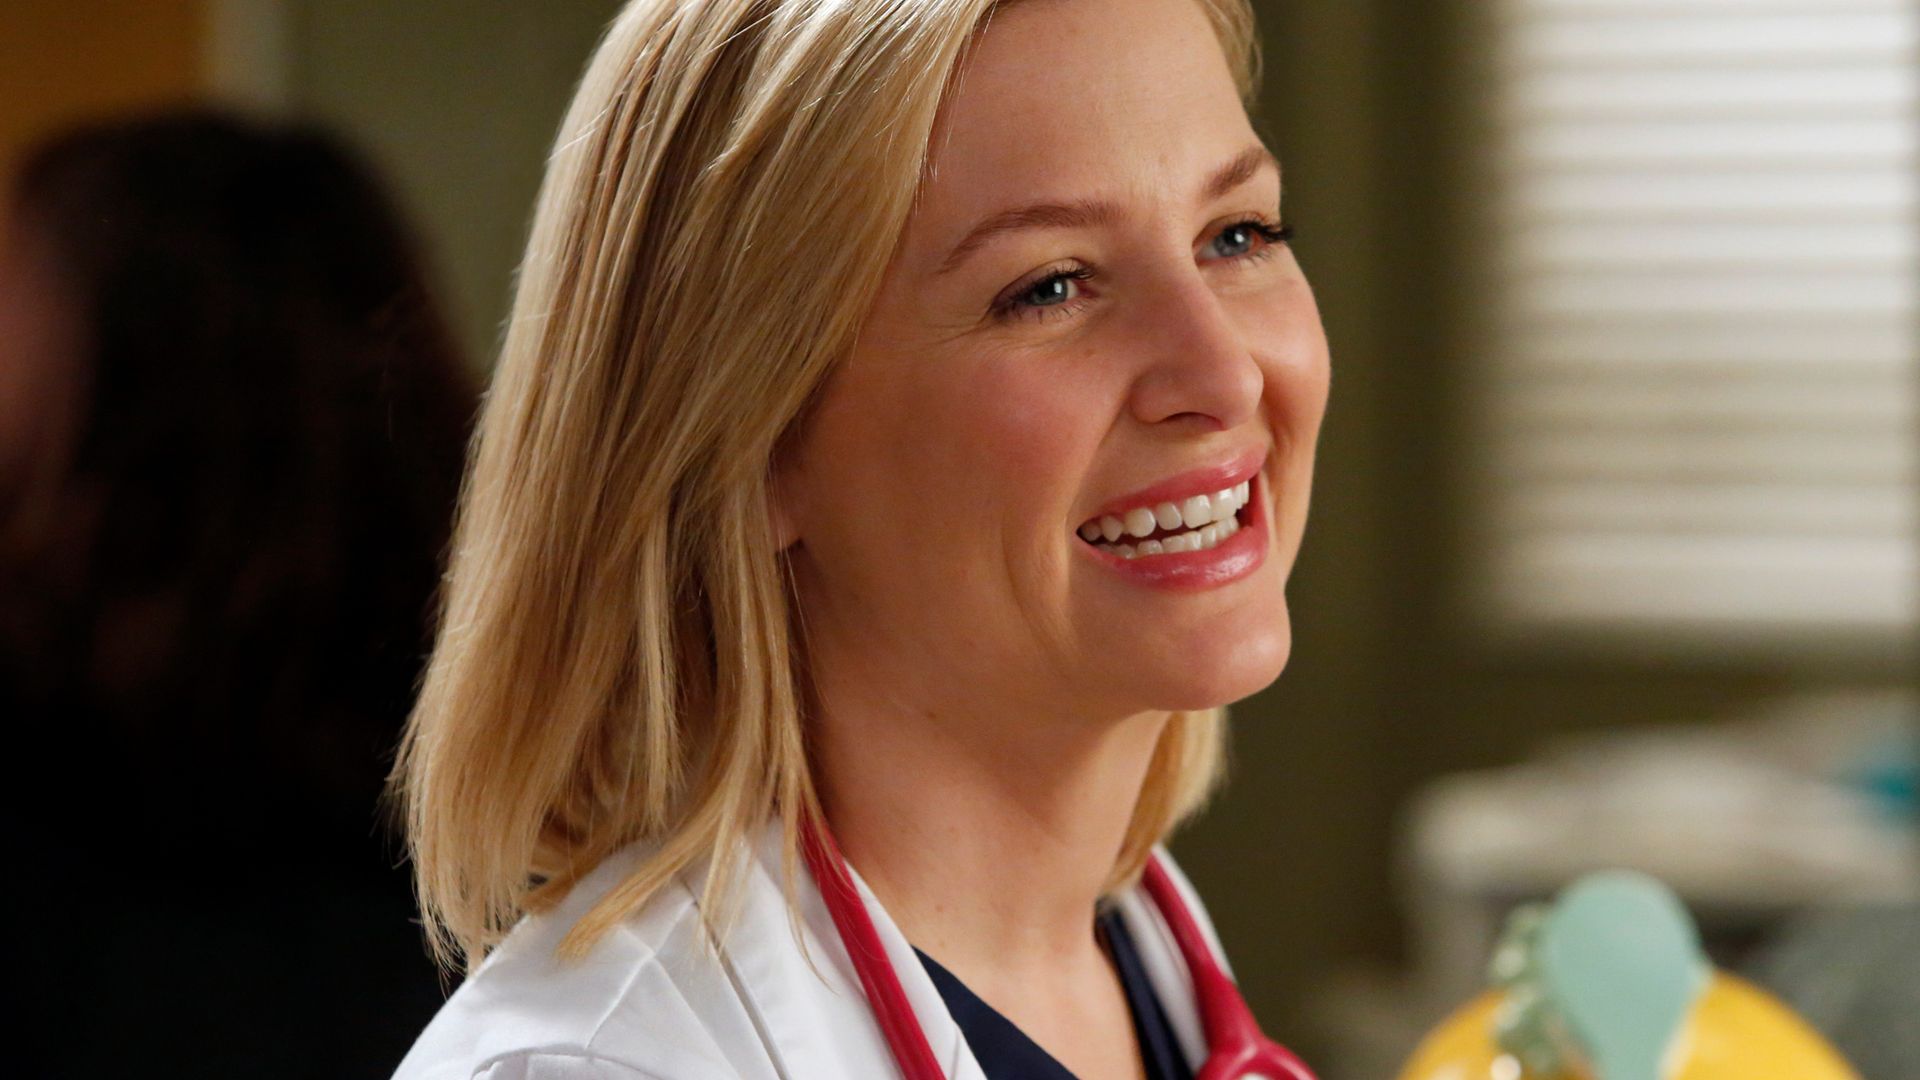 Grey's Anatomy': Jessica Capshaw Reunites With the Cast and Fans Hope Arizona Robbins Will Come Back in Season 17